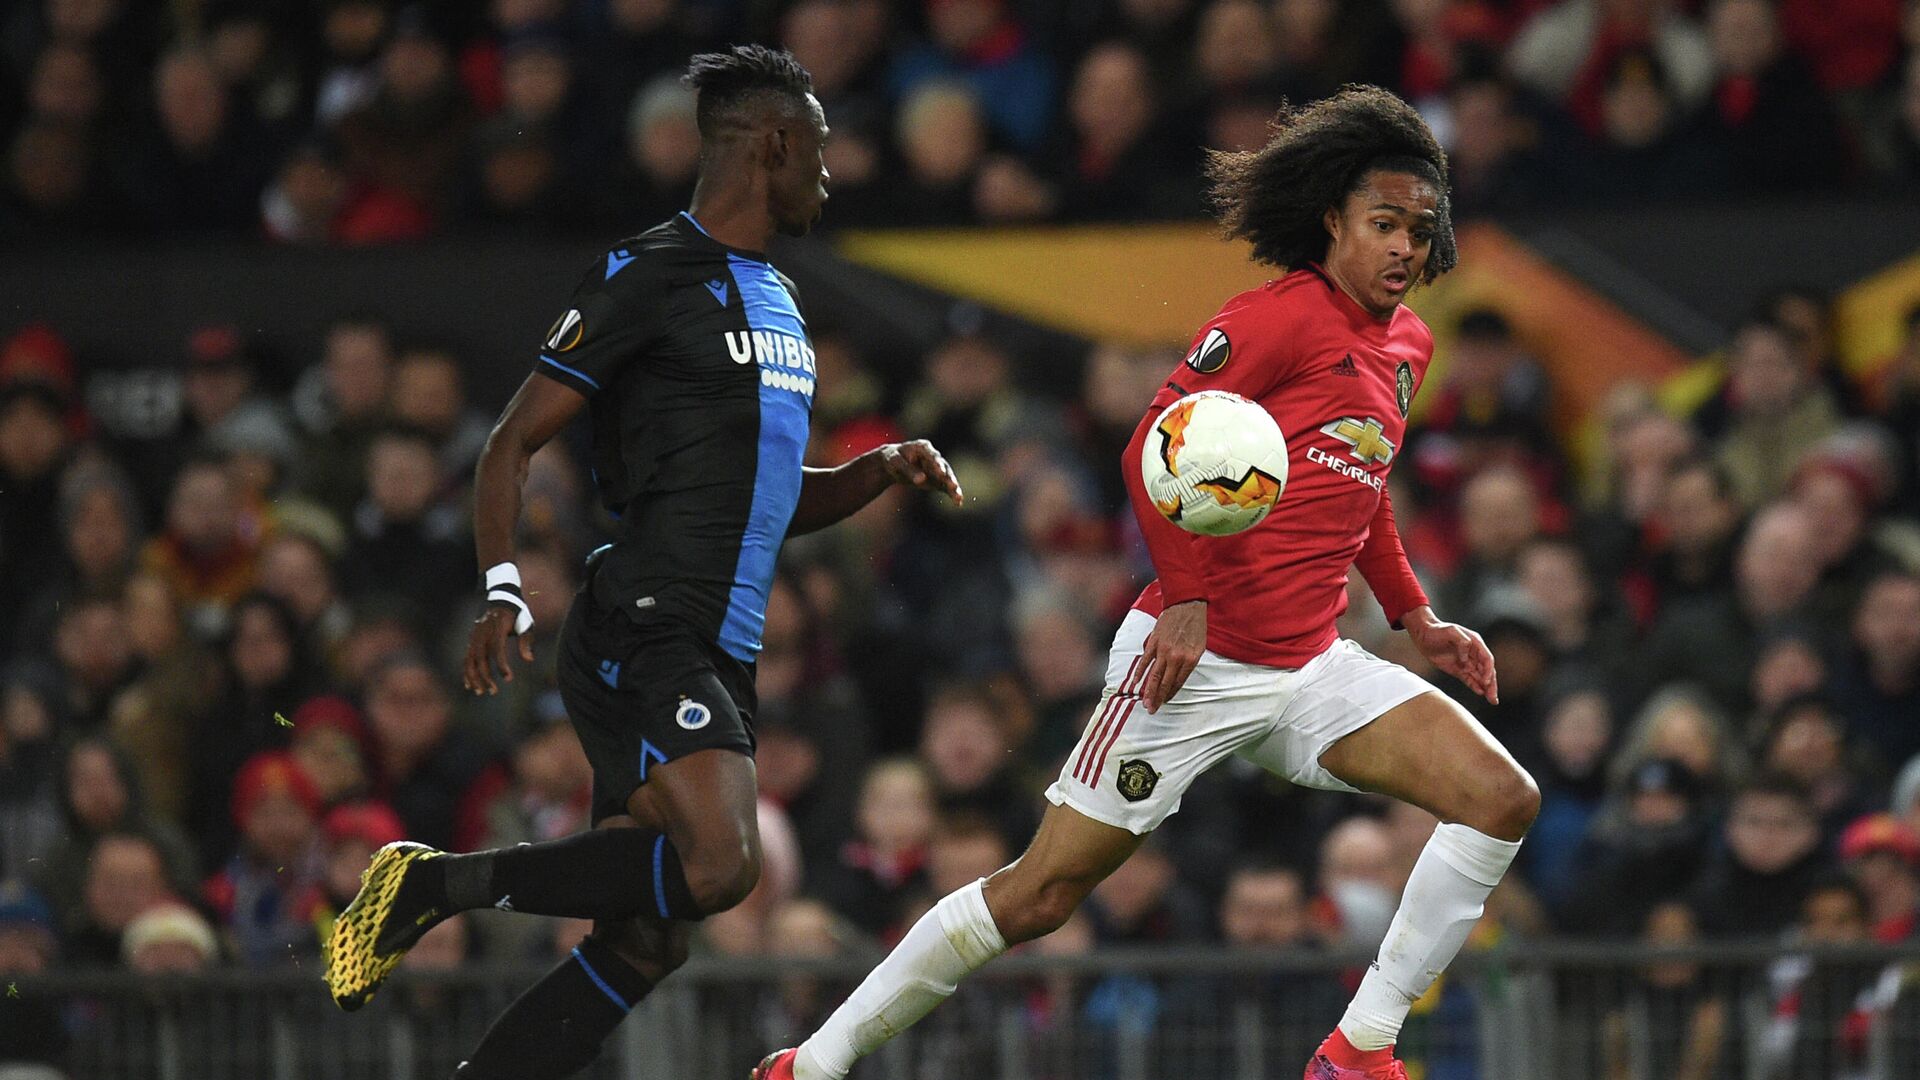 Club Brugge's Ivorian defender Odilon Kossounou (L) vies with Manchester United's Dutch midfielder Tahith Chong during the UEFA Europa League round of 32 second leg football match between Manchester United and Club Brugge at Old Trafford in Manchester, north west England, on February 27, 2020. (Photo by Oli SCARFF / AFP) - РИА Новости, 1920, 09.07.2021